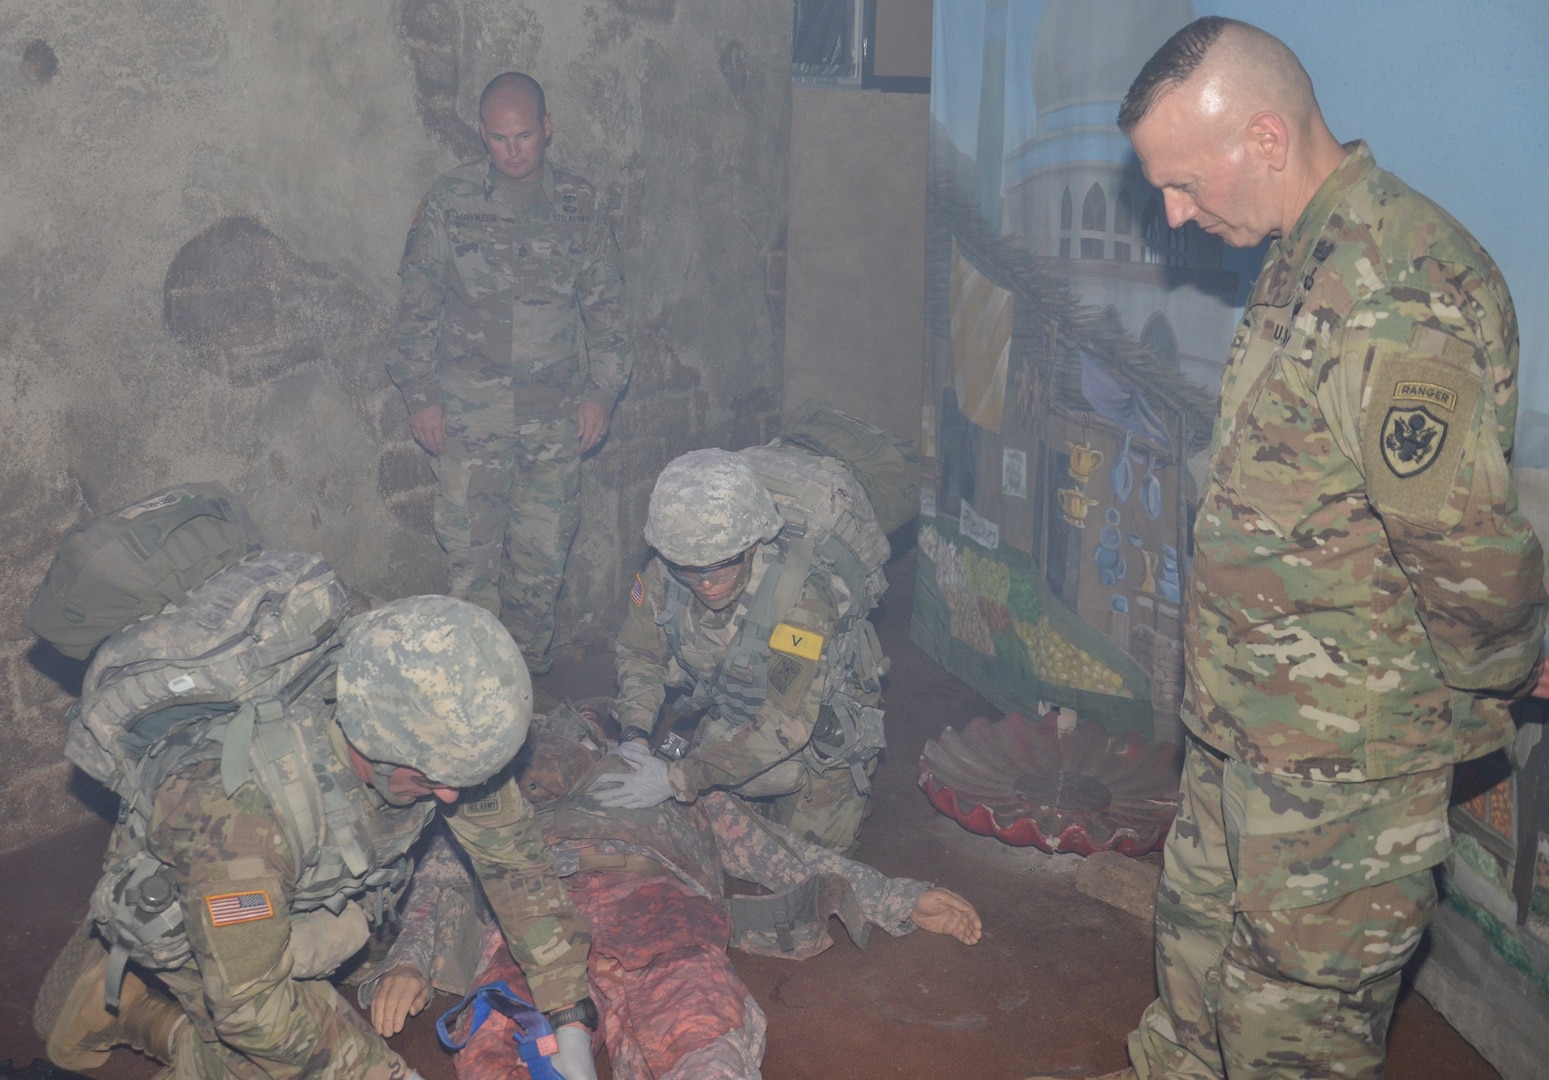 Command Sgt. Major John Wayne Troxell, senior enlisted advisor to the Chairman of the Joint Chiefs of Staff and the senior non-commissioned officer in the U.S. Armed Forces, observes Army Combat Medic Training trainees conduct an exercise in the Combat Trauma Patient Simulator constructed to resemble a Middle Eastern marketplace in the aftermath of an explosion set off by a suicide bomber. The “casualties,” which are life-like manikins called human patient simulators, appear to have received several traumatic injuries including amputations and gunshot wounds. The combat medic trainees assess the injuries and take actions to treat them while sirens blare, the room fills with smoke, and the lights are dimmed.